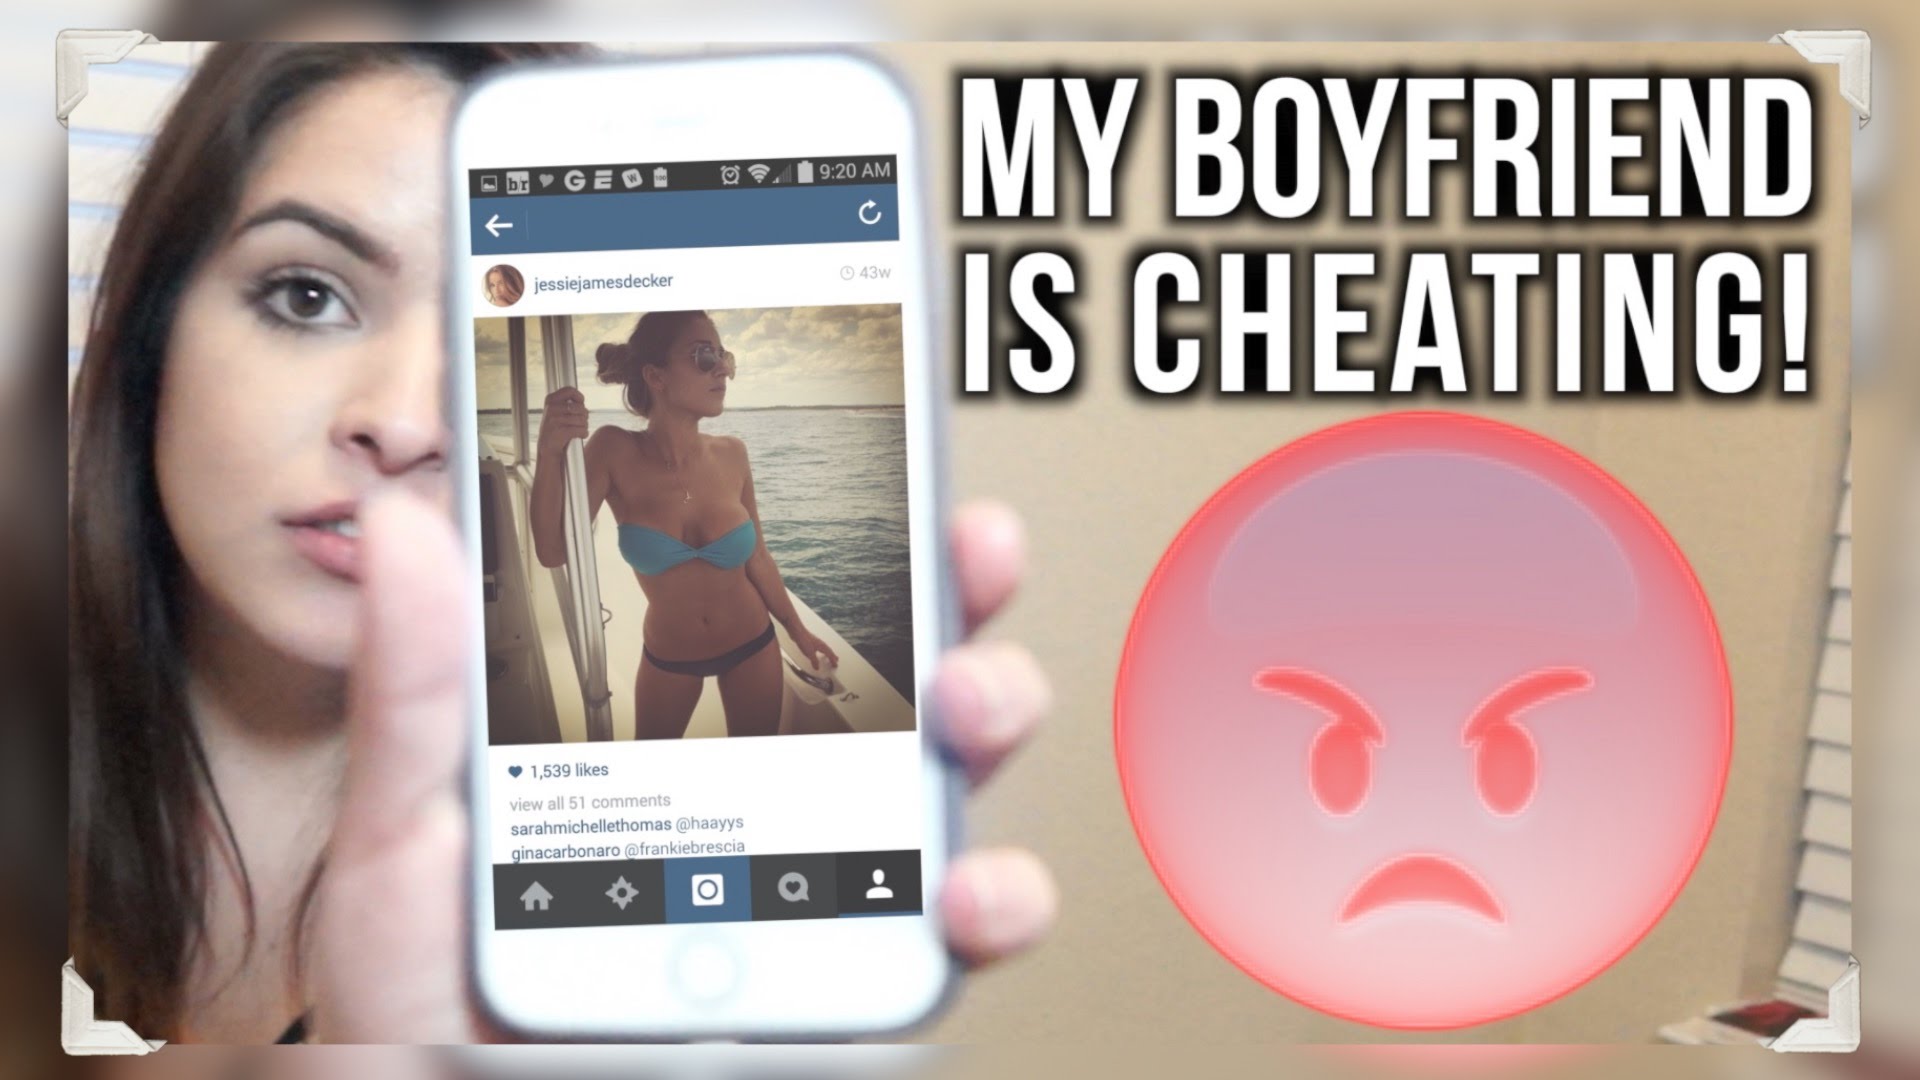 26 Signs He's Cheating On You